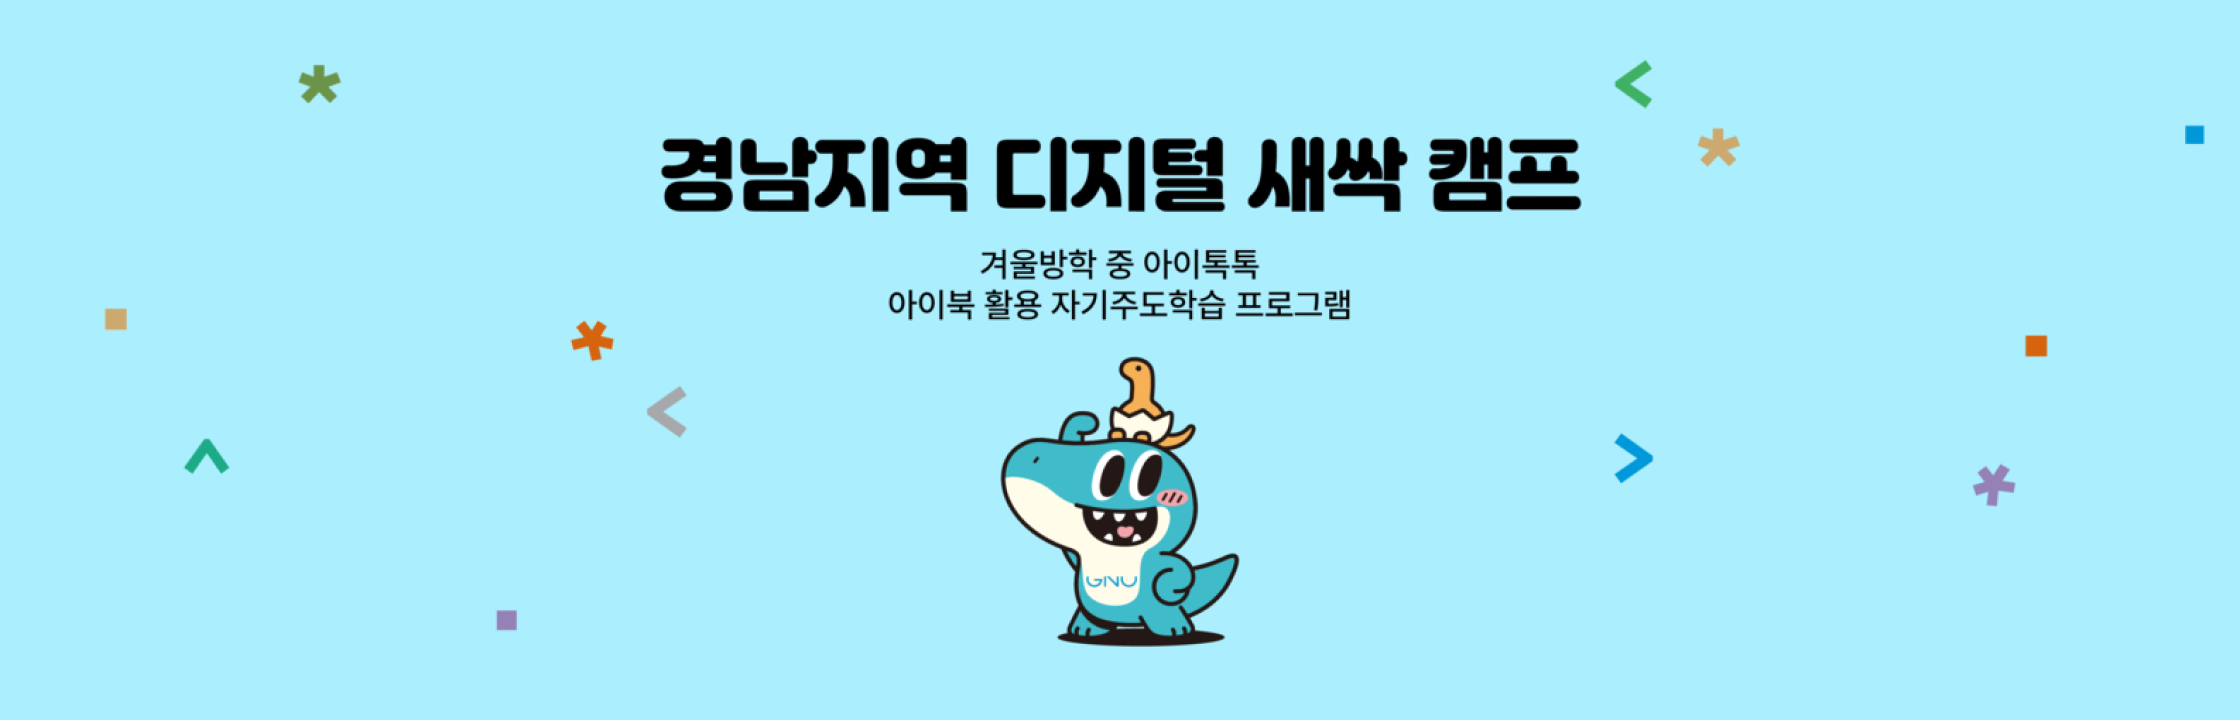 the first step in future talent
Gyeongsang National University X Ellis Digital Sprout Camp